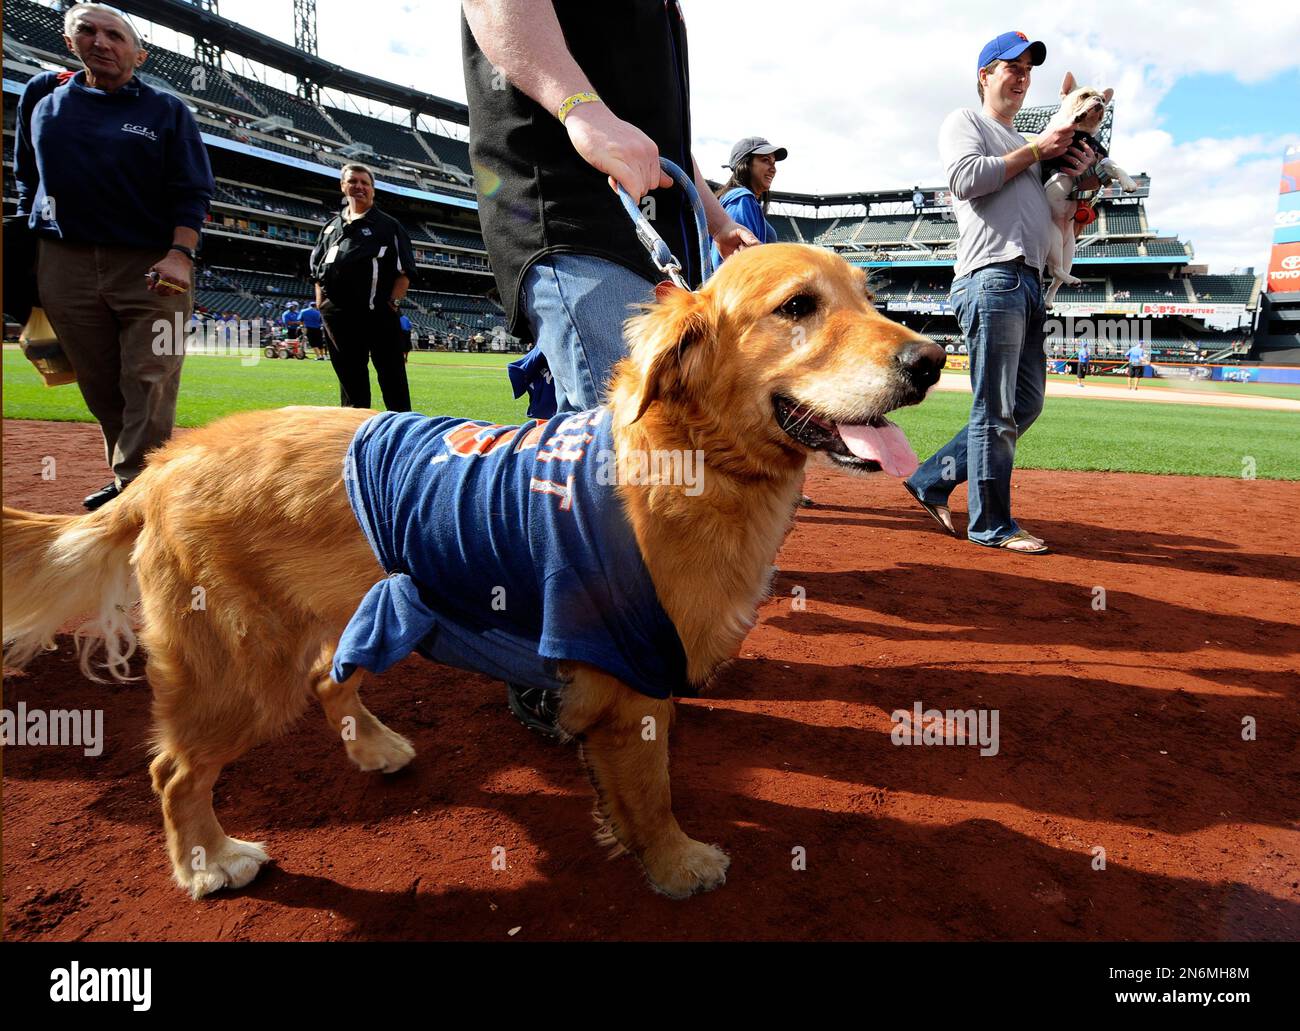 Bark in the Park with the Mets